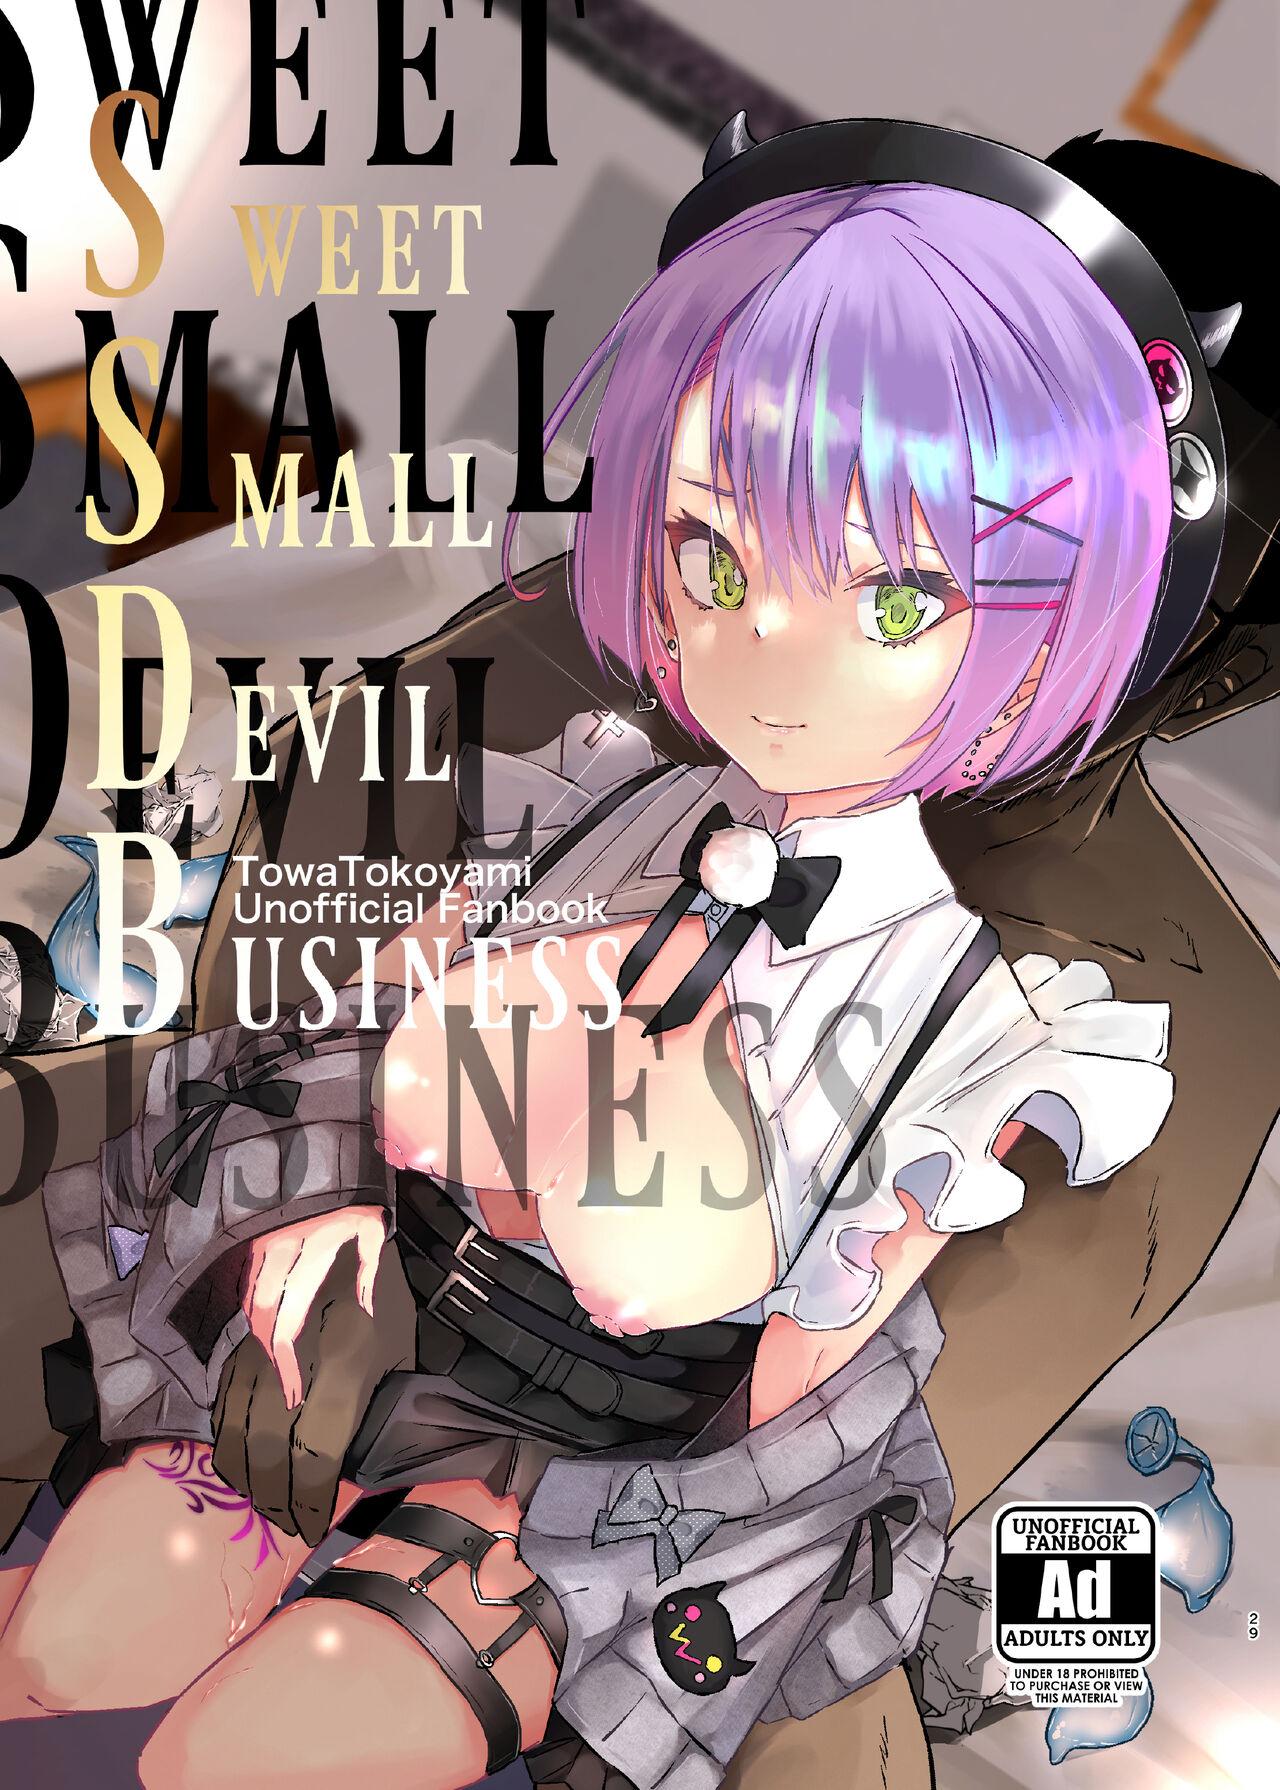 sweet small devil business 0